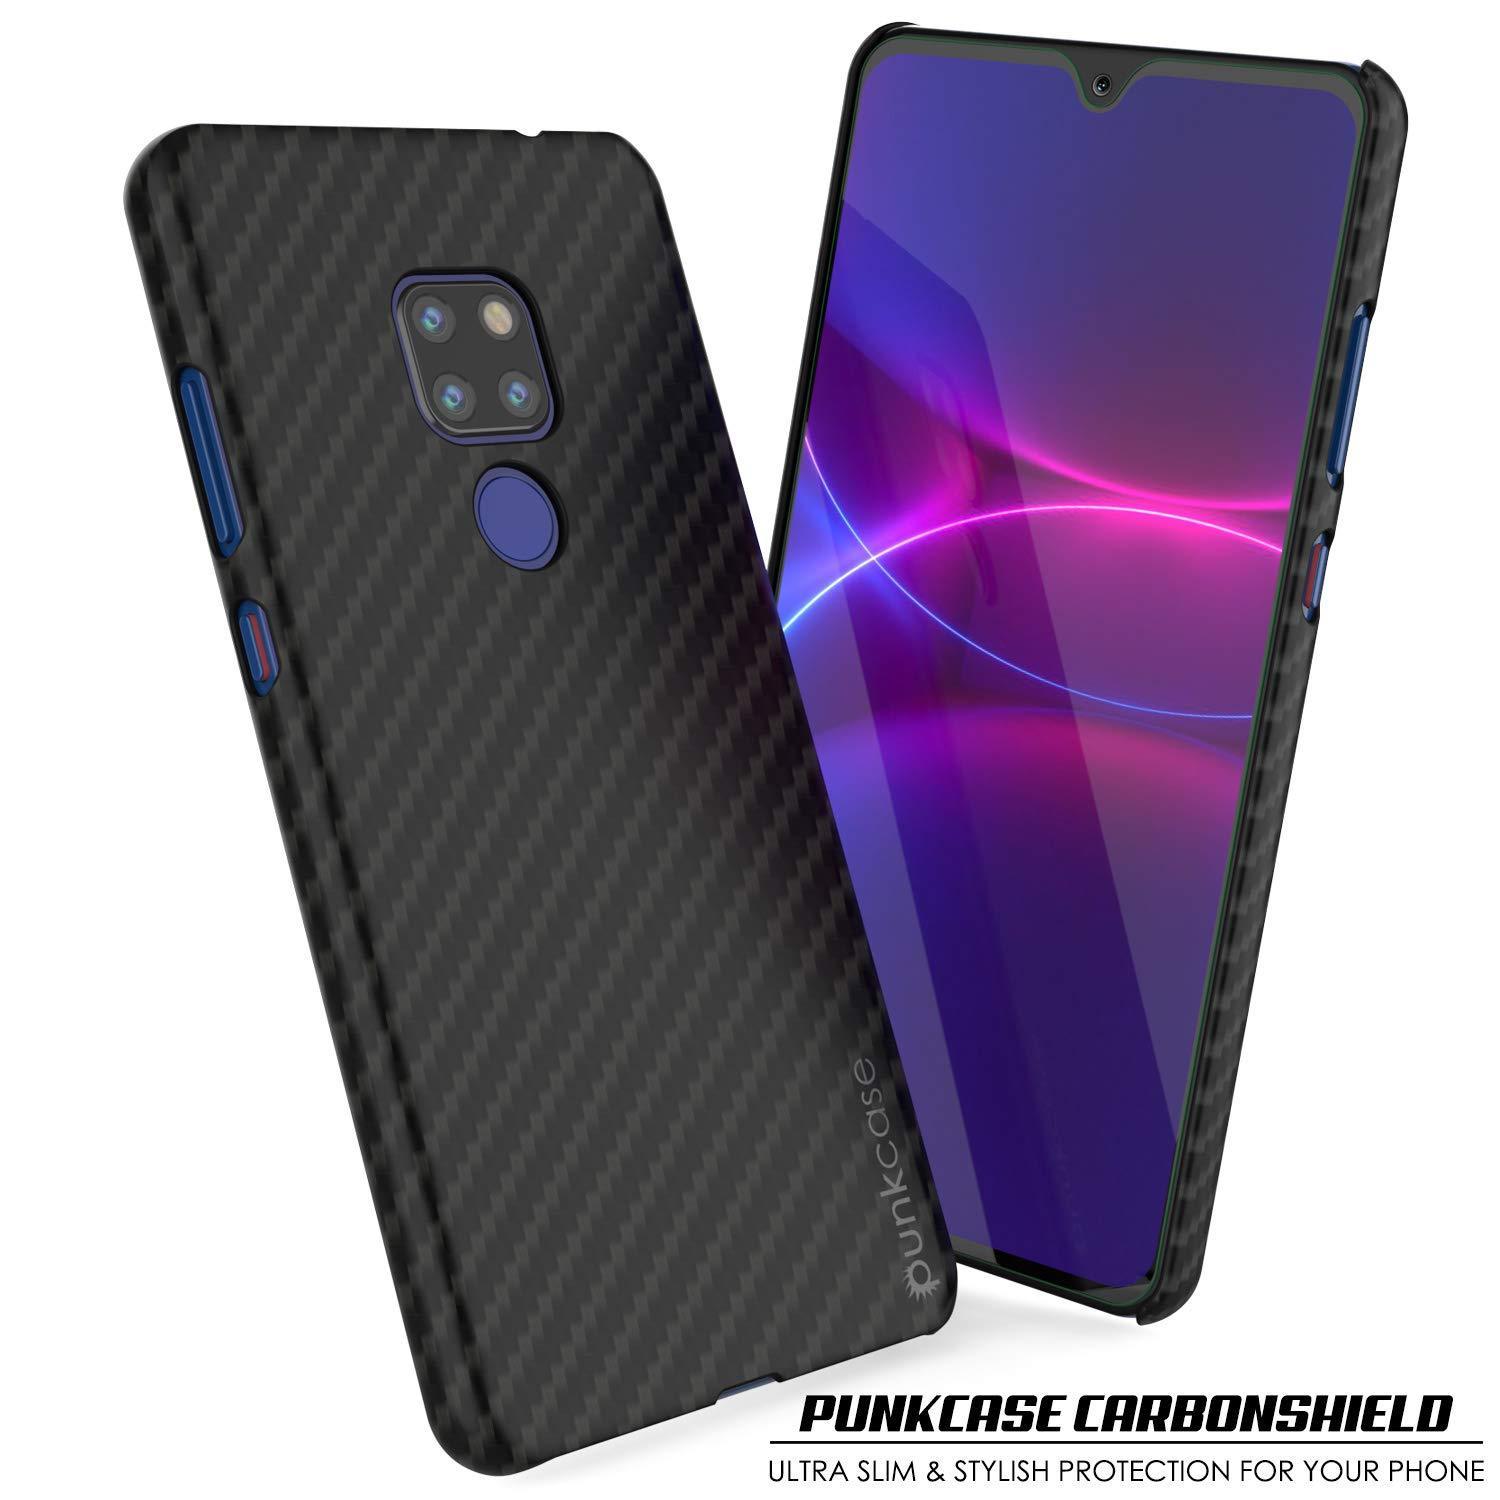 Huawei Mate 30 Pro Case, Punkcase CarbonShield, Heavy Duty [Black] Cover